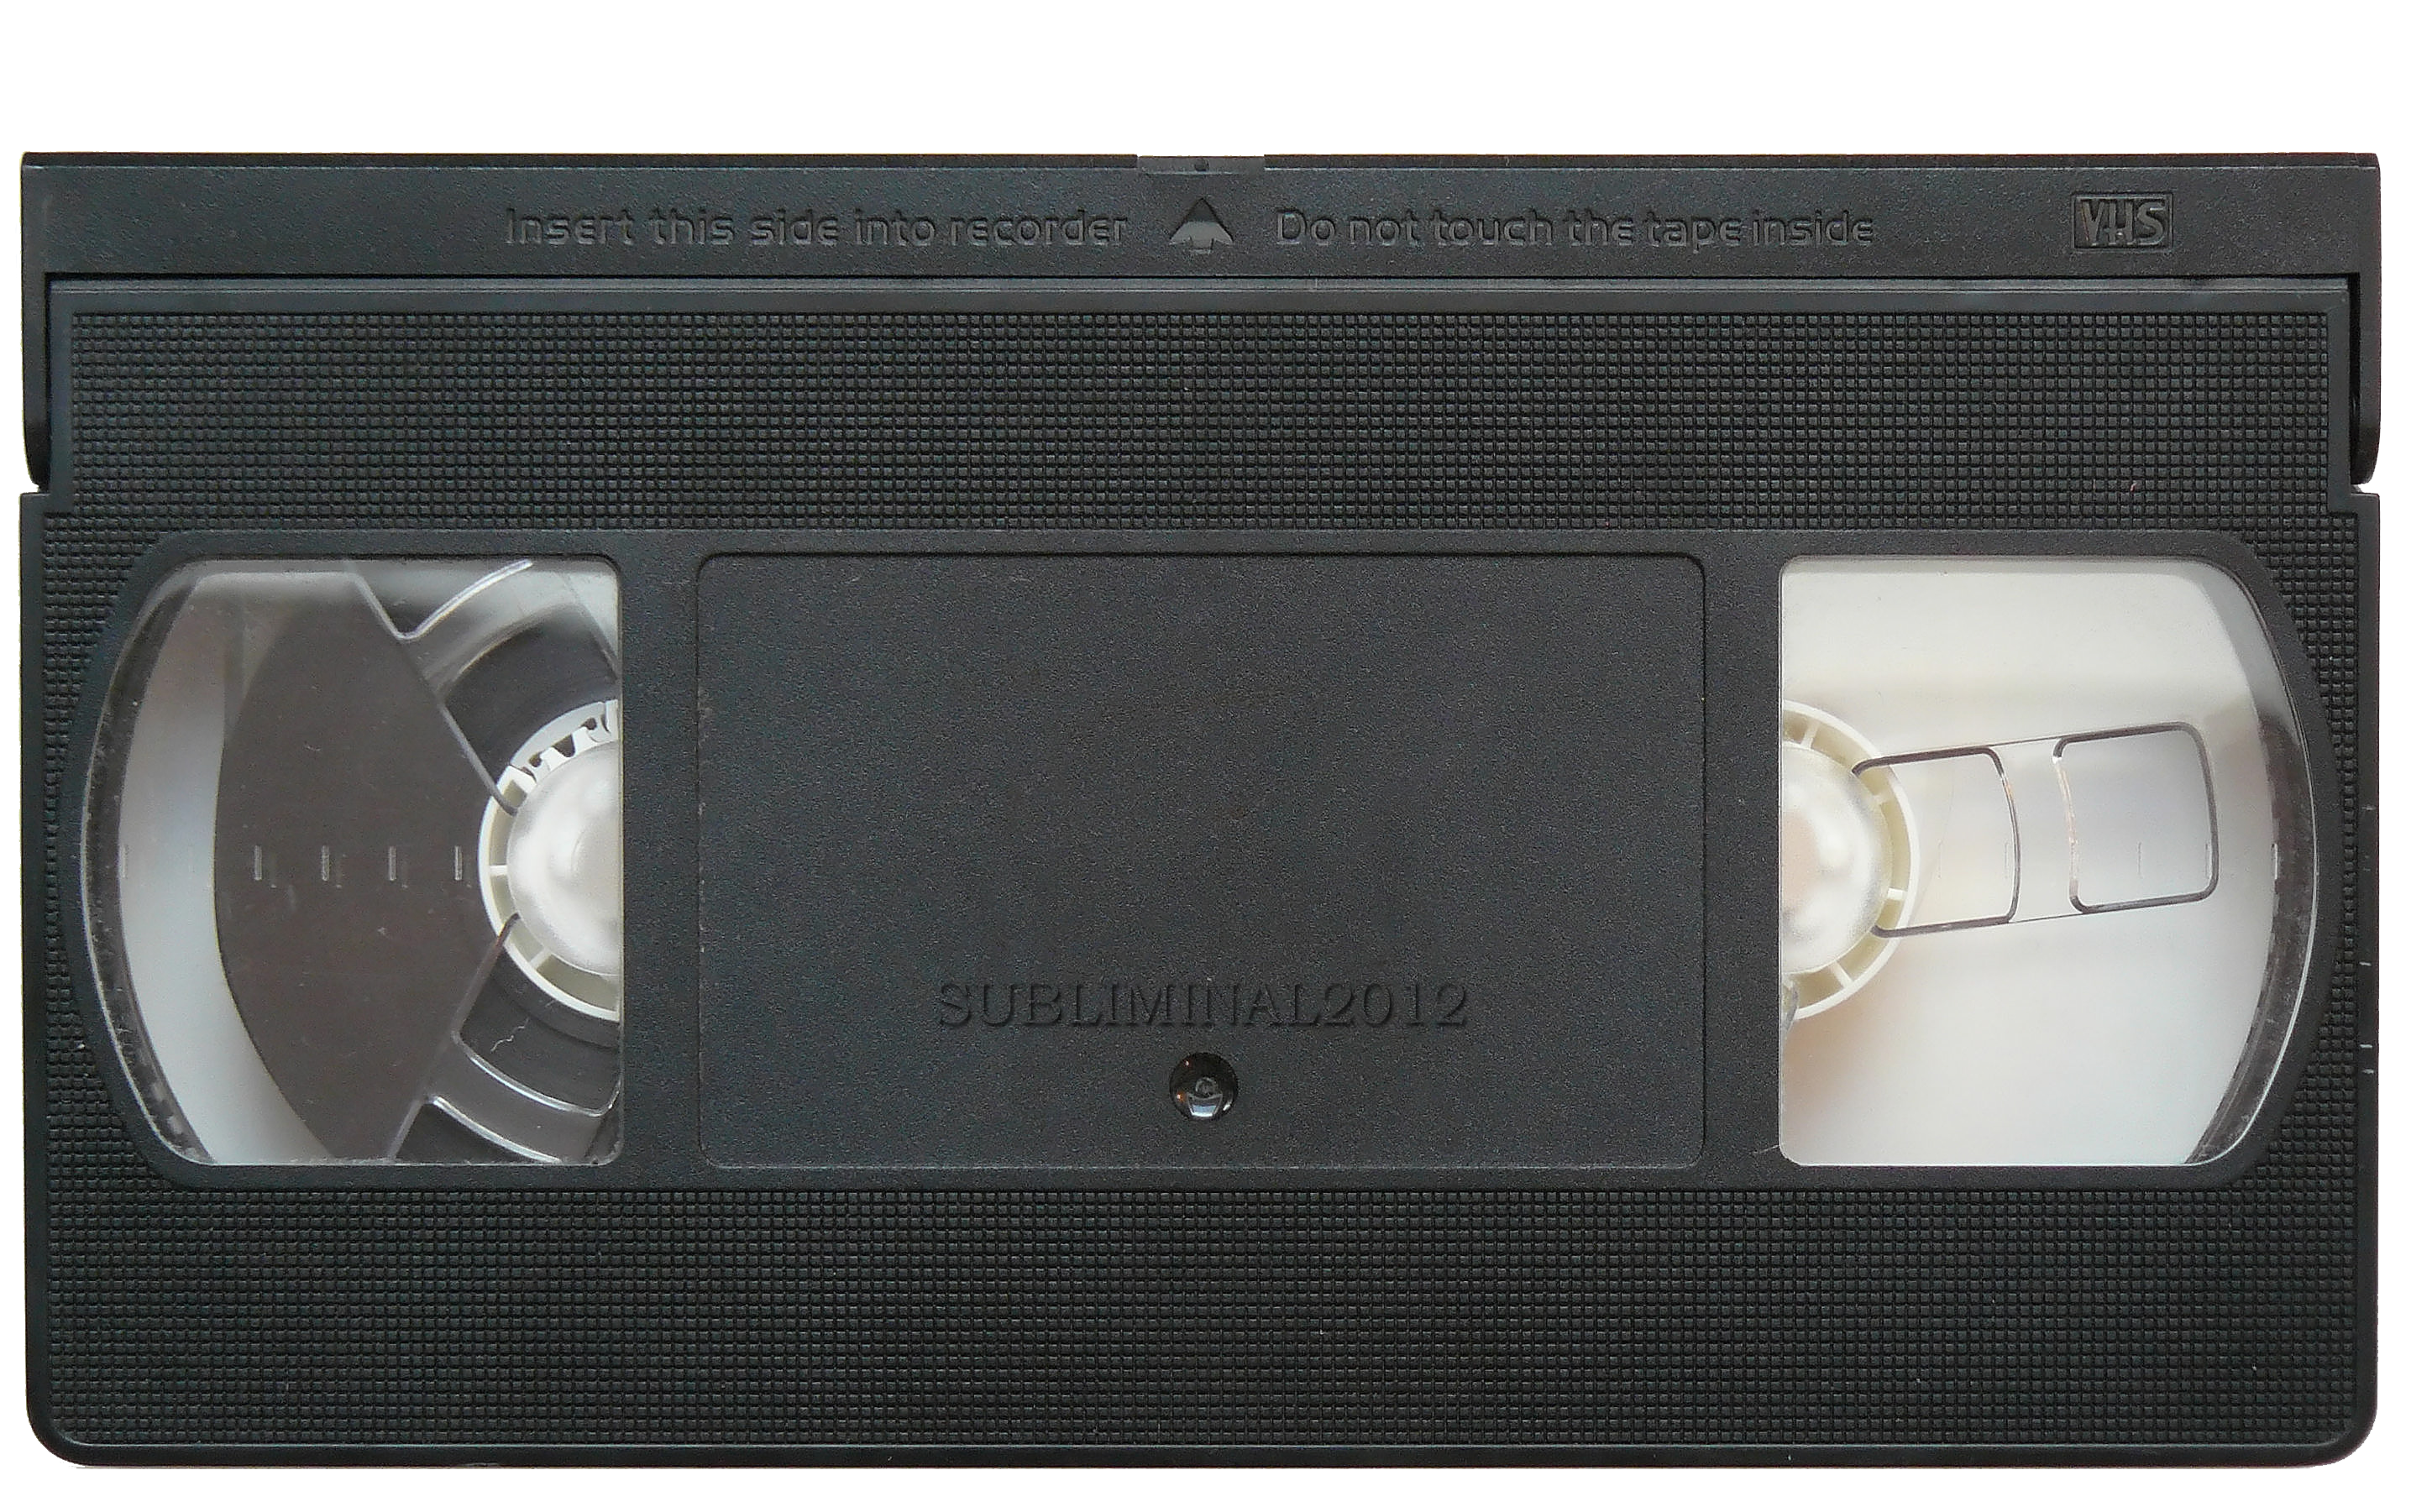 VHS to DVD Conversion